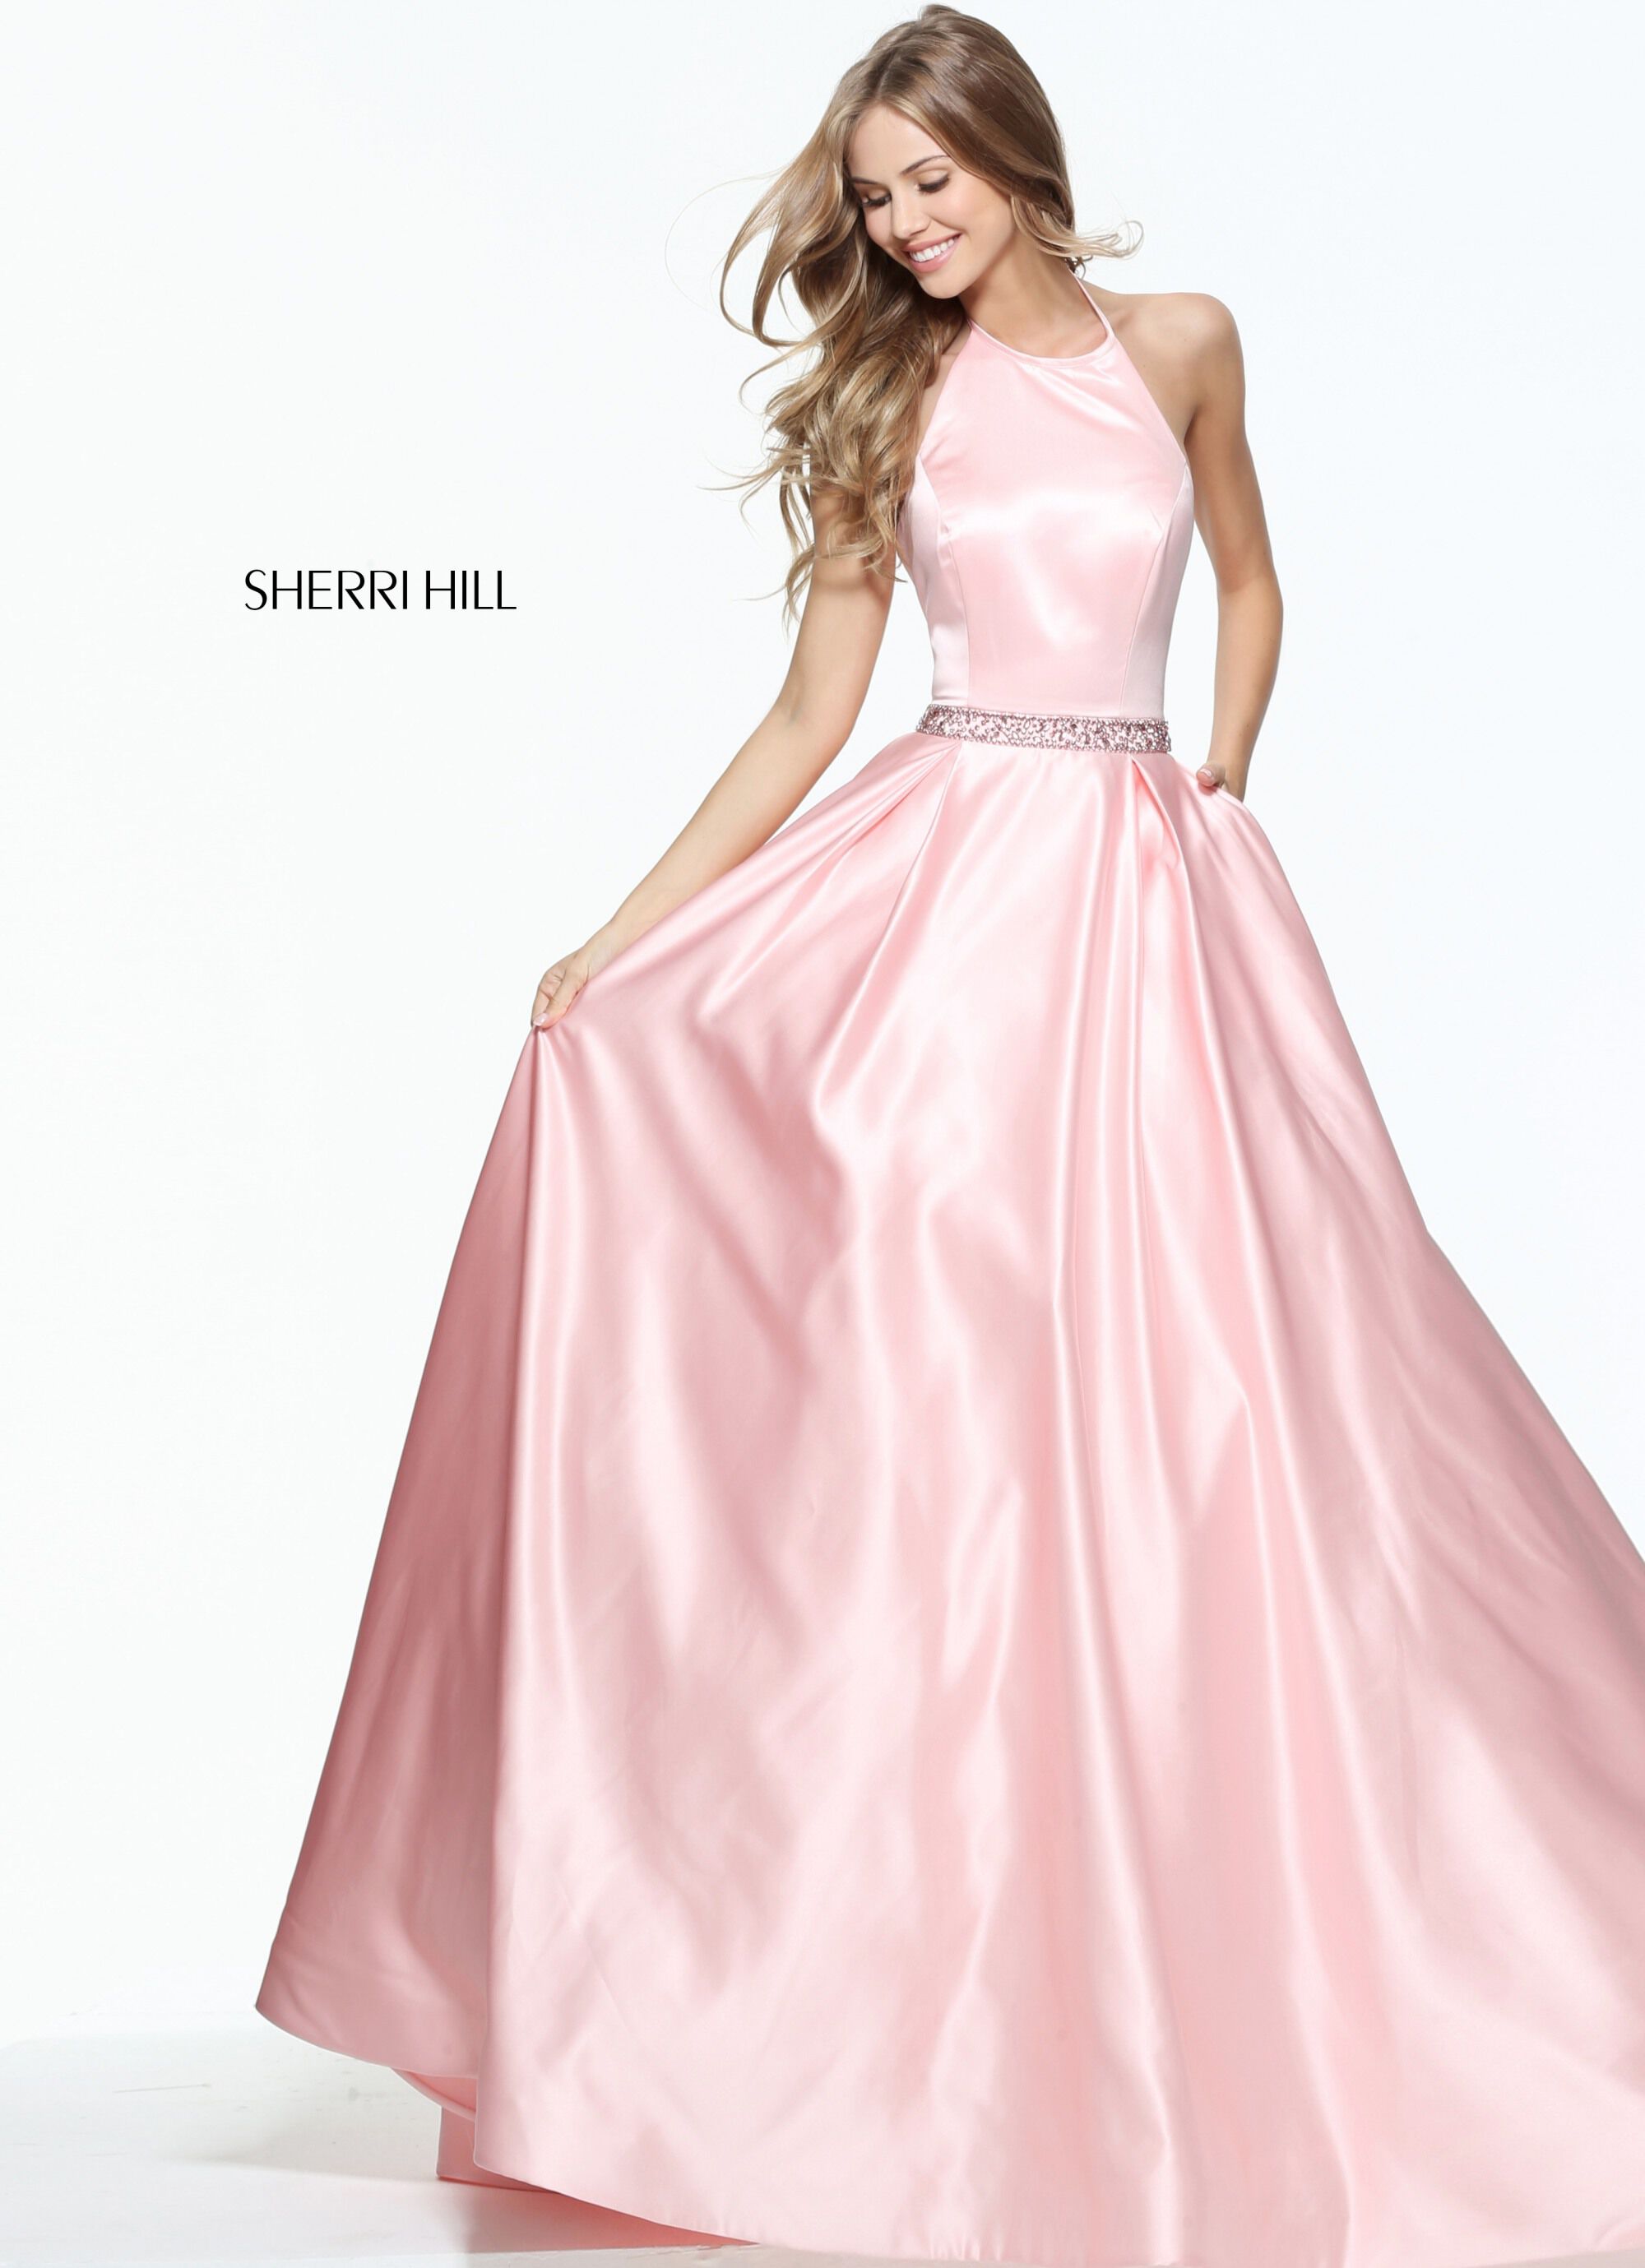 style № 51036 designed by SherriHill